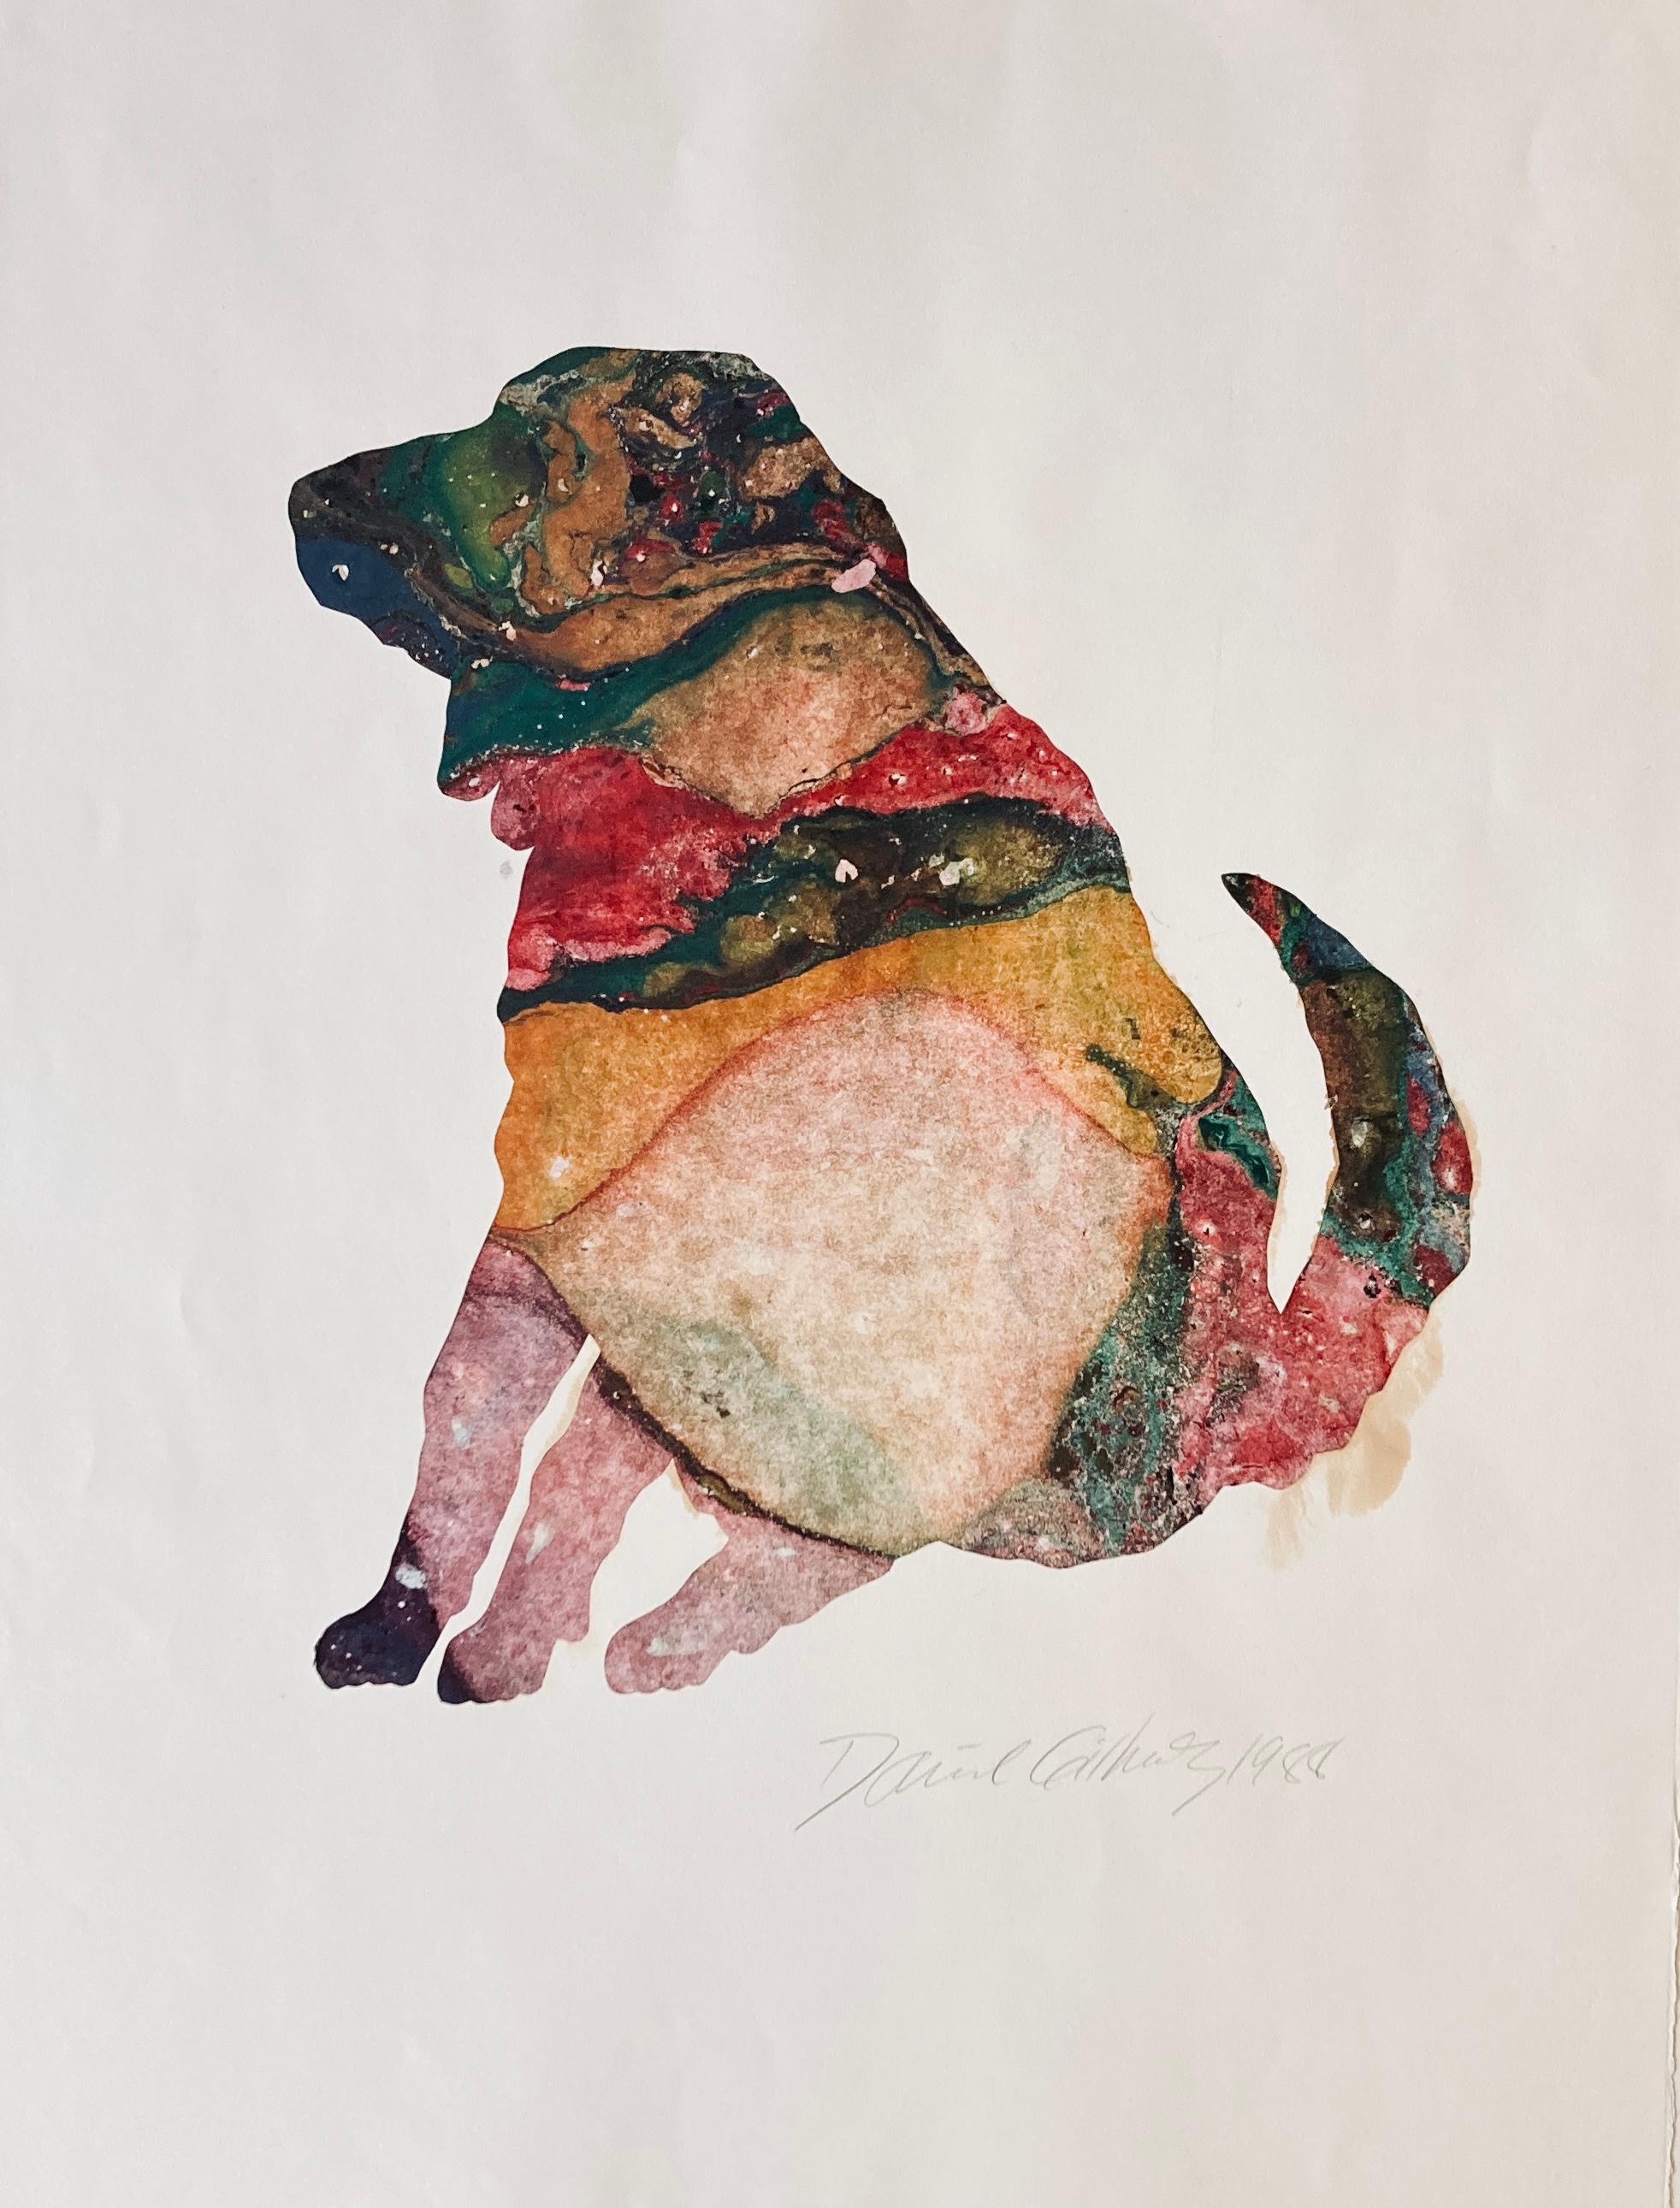 David Gilhooly (1943-2013)
Agate Dog, 1988
Tiled in pencil on the verso
Monotype on BFK Rives Paper
Signed and dated in pencil, lower right
Unframed: 30in H x 22 in L
The monoprint is a form of printmaking where the image can only be made once,